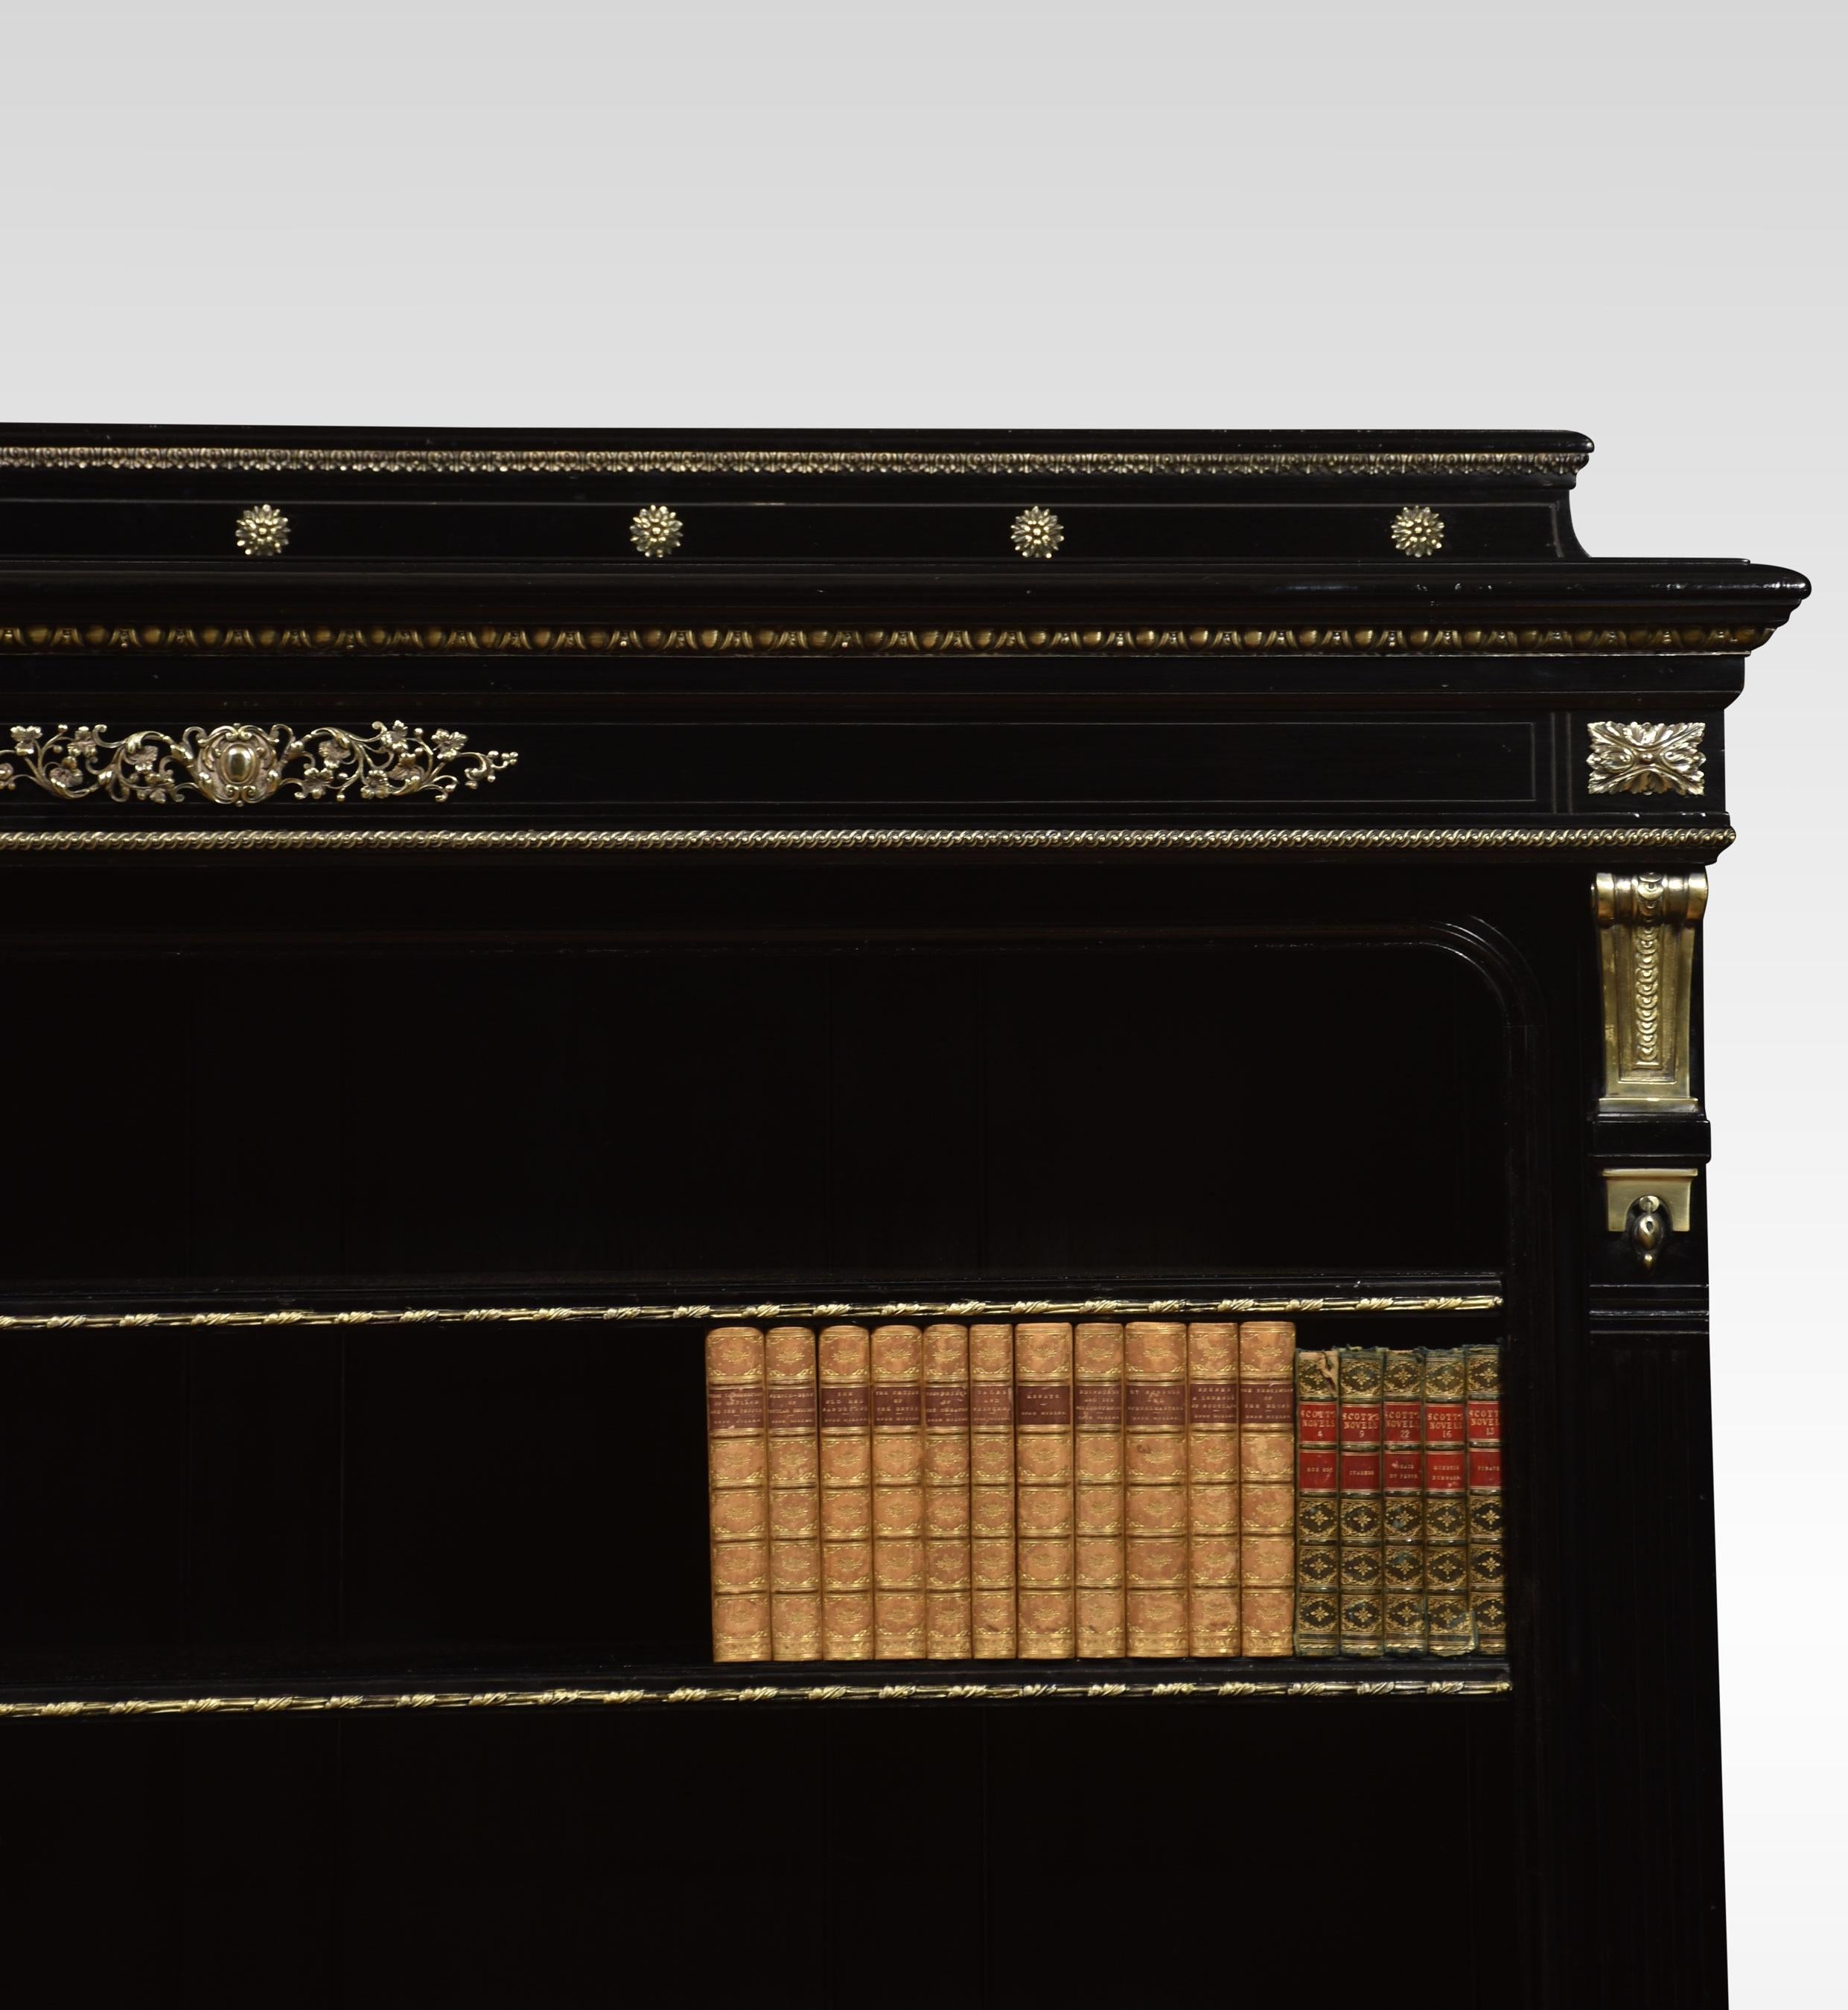 19th Century ebonised and gilt mounted open bookcase having foliage gilt decoration throughout. The quarter gallery top with moulded edge, over an ornate gilt egg and floral scrolling design mounted on the frieze. Above three adjustable shelves,